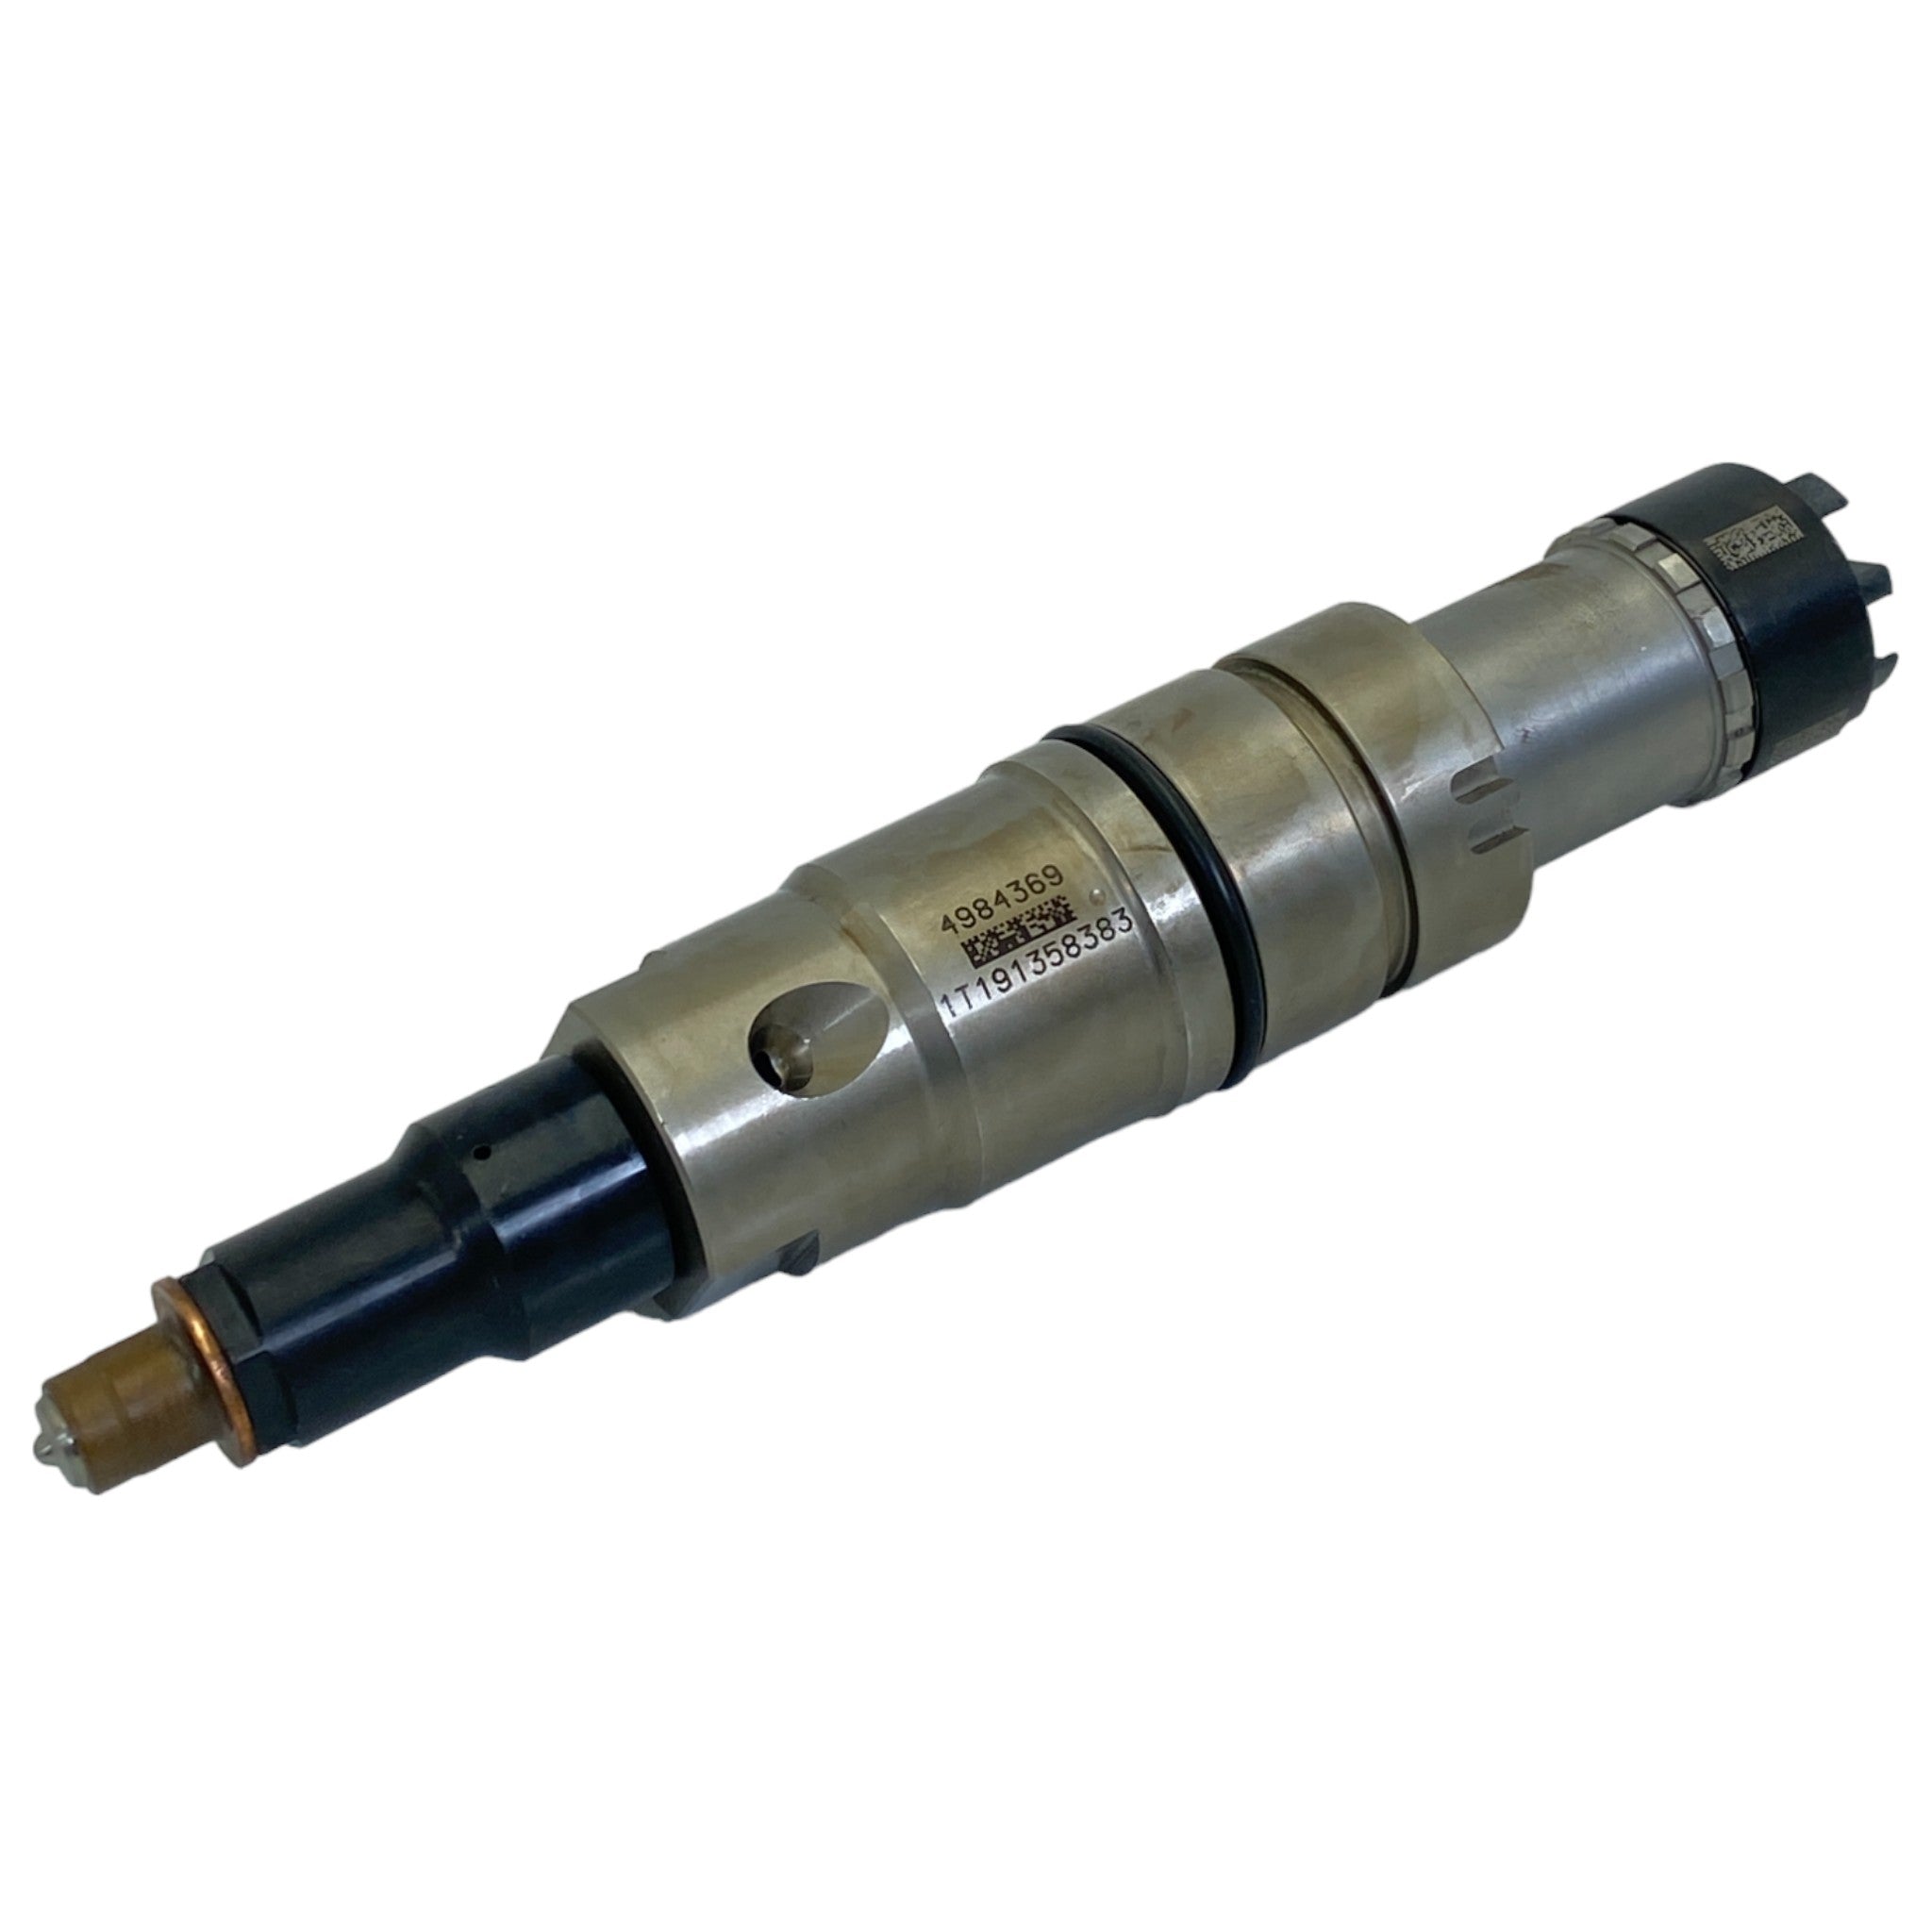 2897320Px Oem Cummins Fuel Injector For Xpi Fuel Systems On Epa13 15L Isx/Qsx Engines